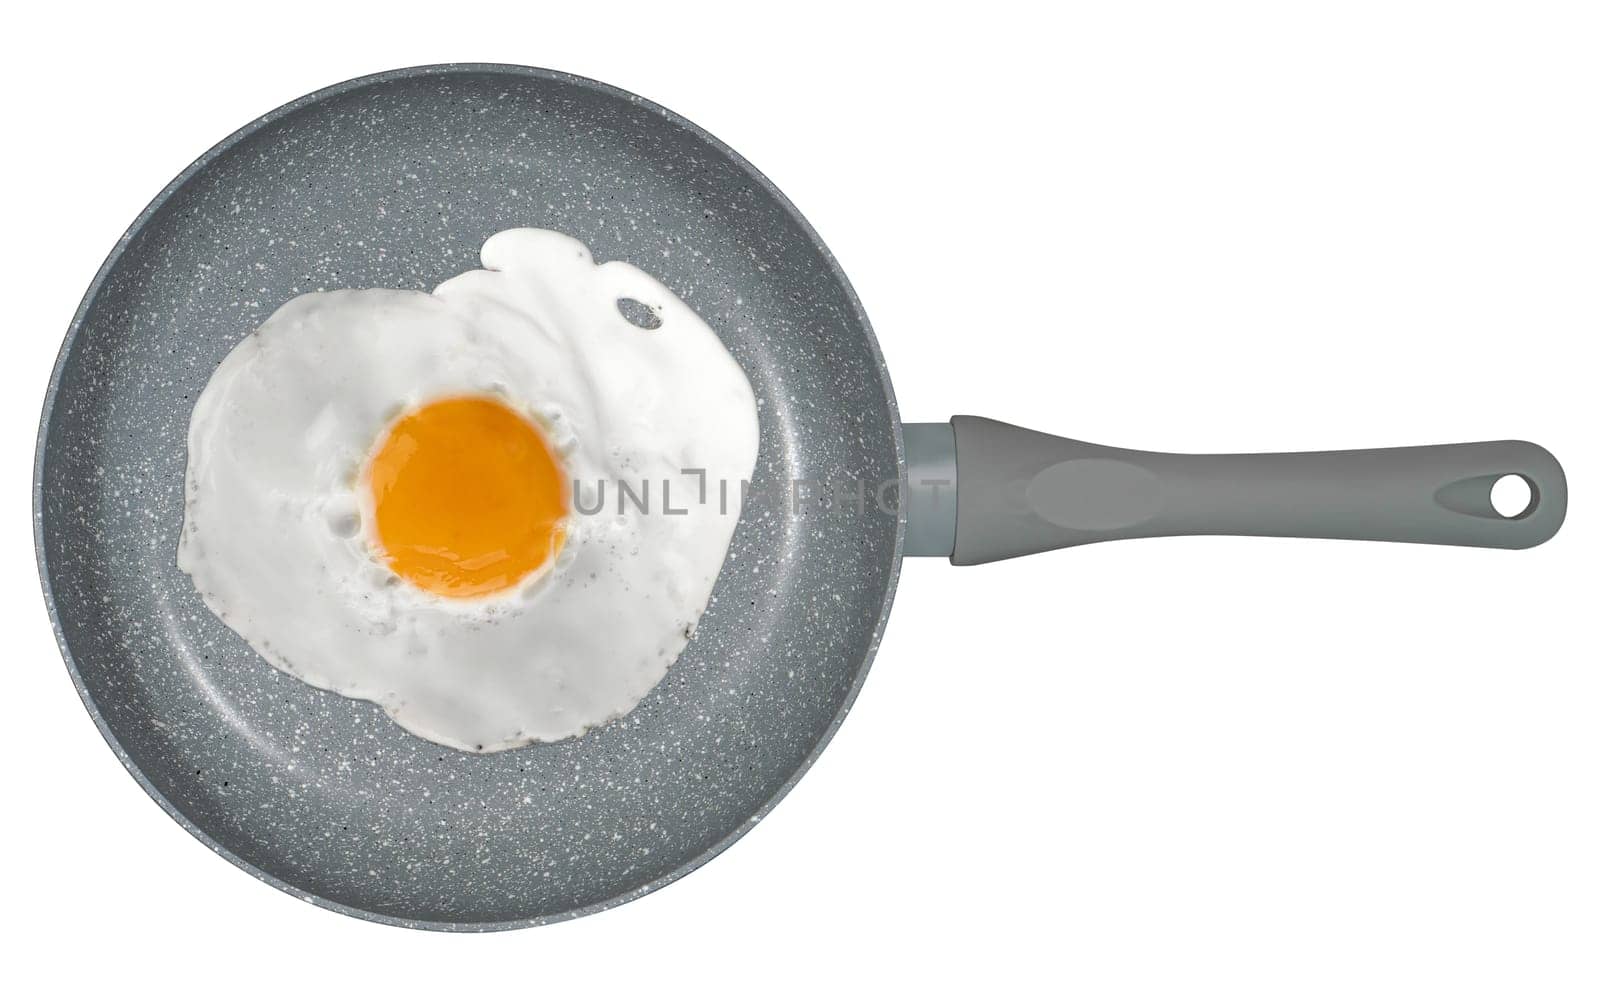 scrambled eggs on a frying pan, on a white background in isolation by A_A